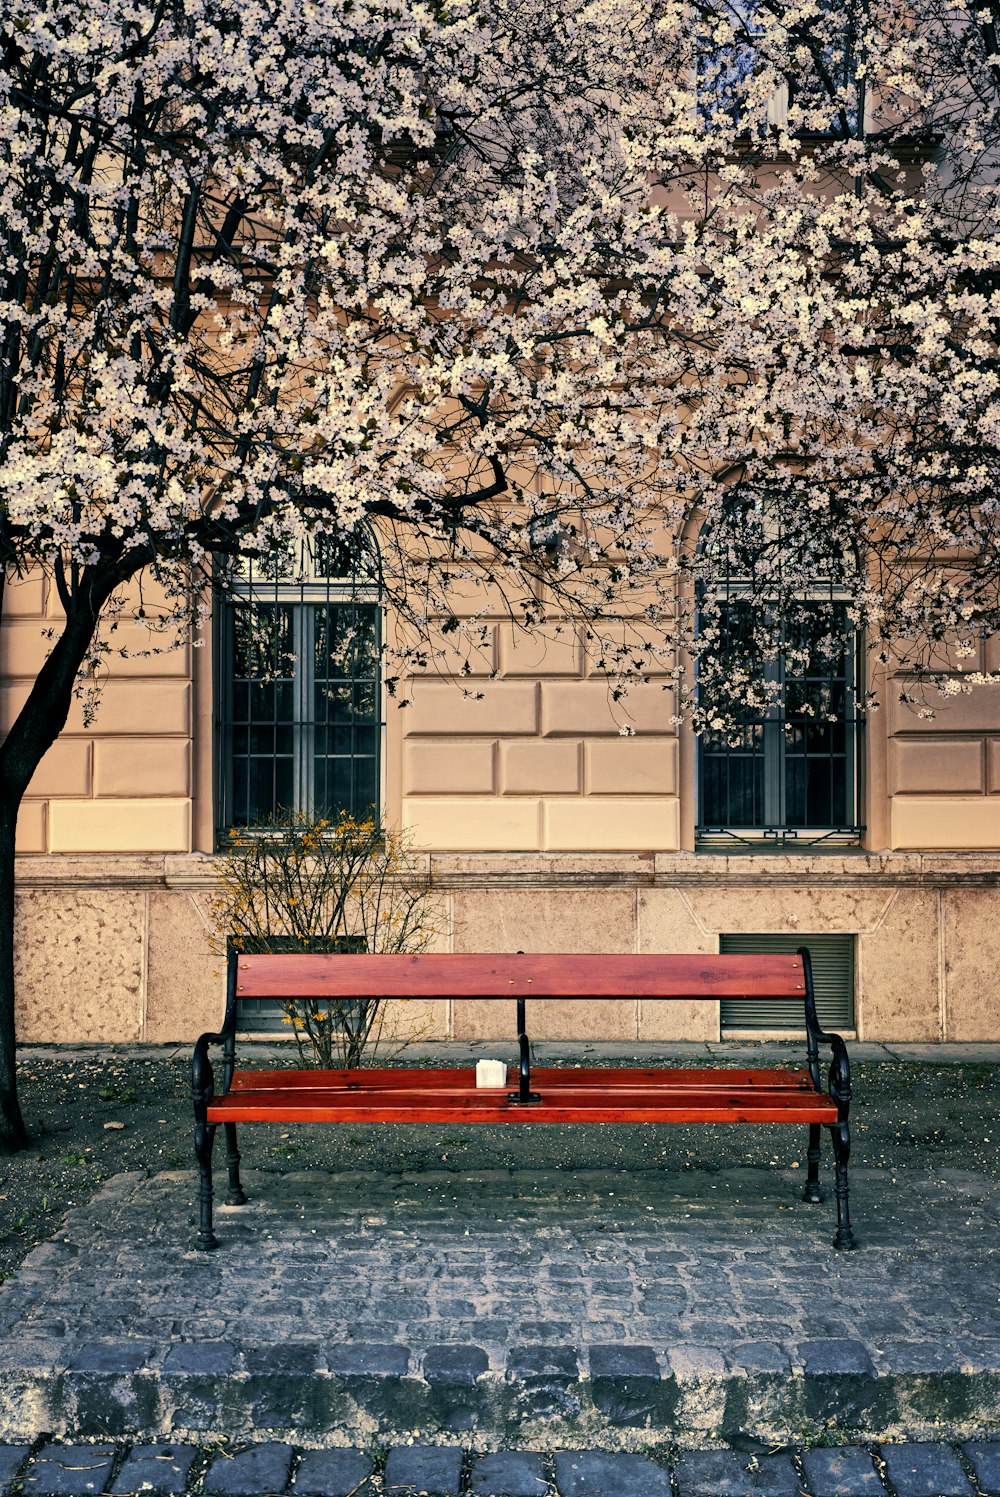 a red bench sitting under a tree next to a building